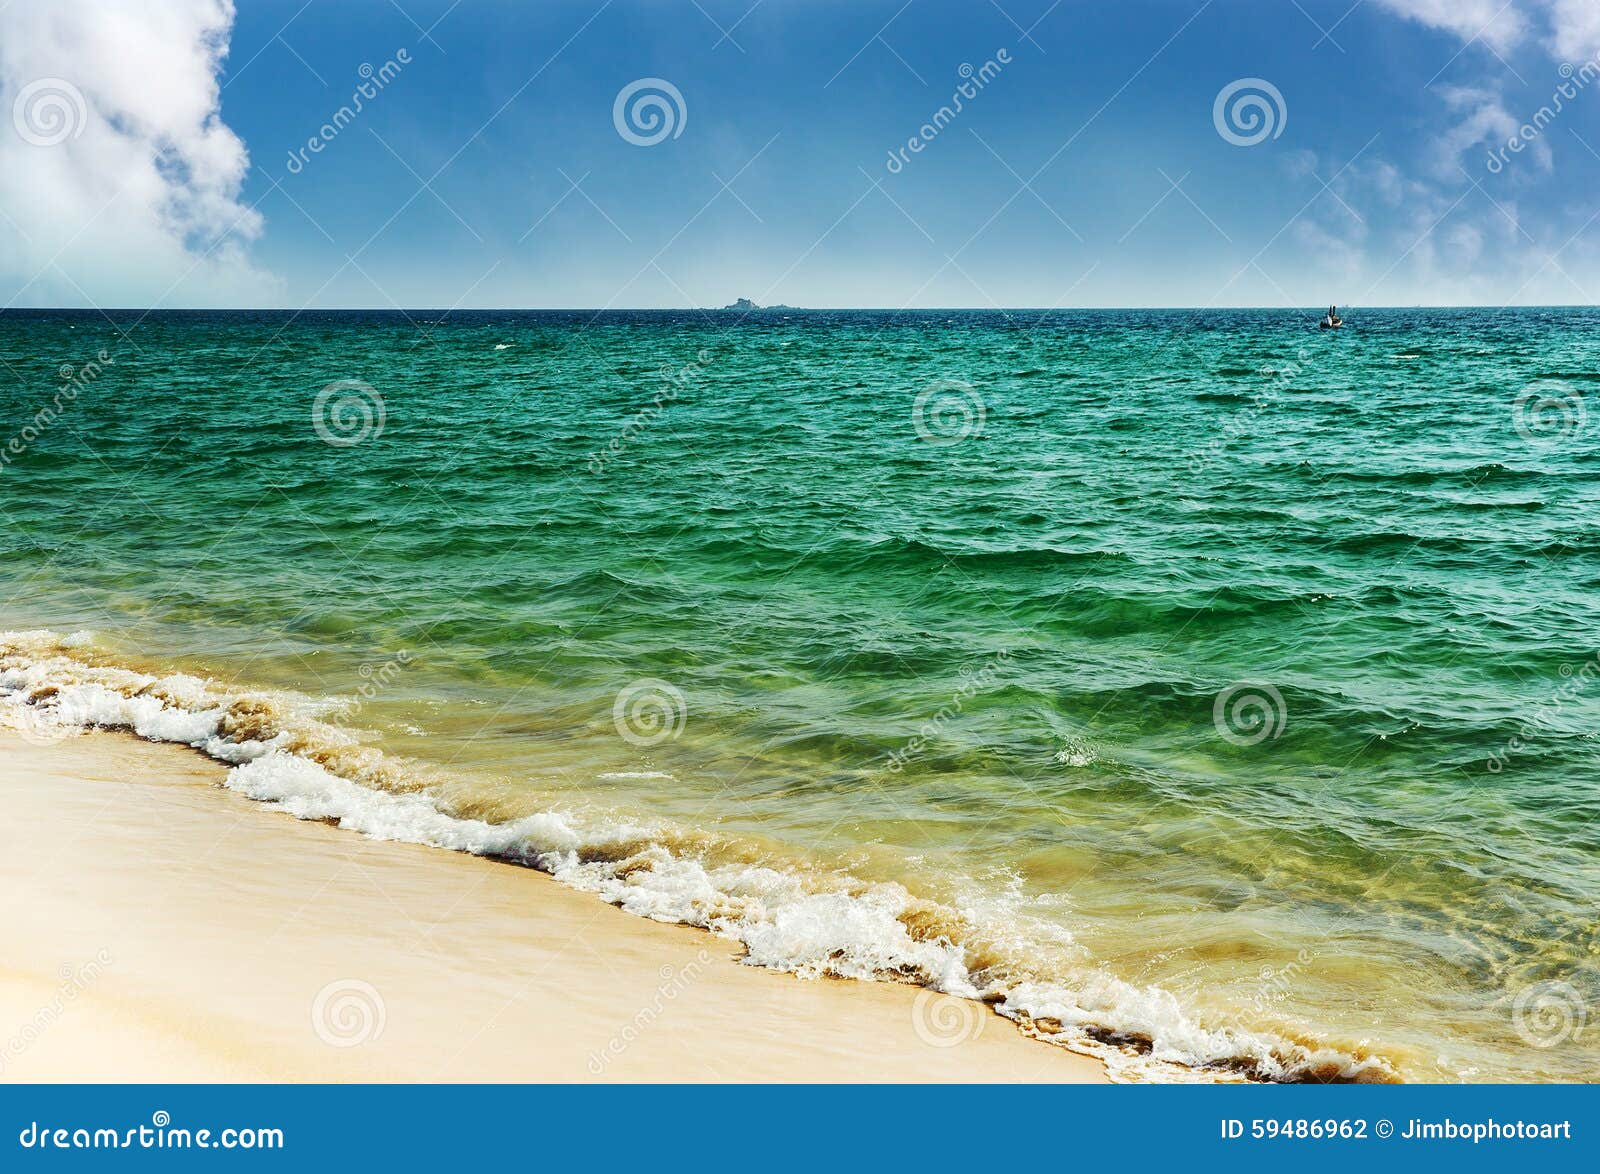 Green Sea Beautiful With Blue Sky And White Cloud Stock Photo Image